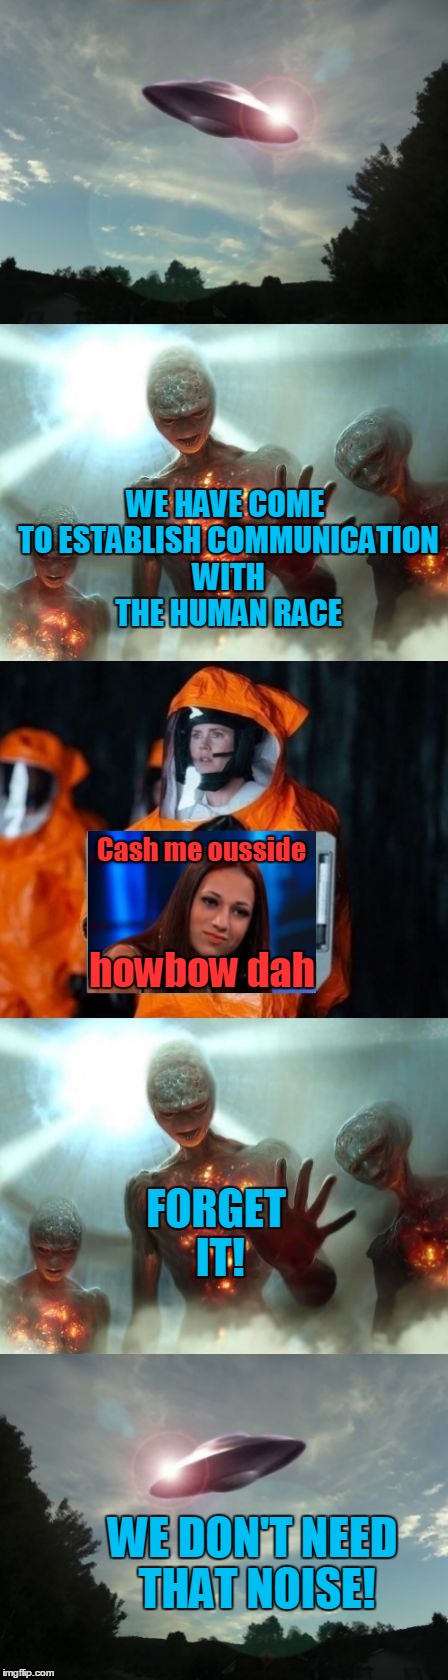 Alien-Proof Your Planet | WE HAVE COME TO ESTABLISH COMMUNICATION WITH THE HUMAN RACE; Cash me ousside; howbow dah; FORGET IT! WE DON'T NEED THAT NOISE! | image tagged in alien communication attempted,amy adams,arrival,memes,cash me ousside howbow dah,the search continues | made w/ Imgflip meme maker